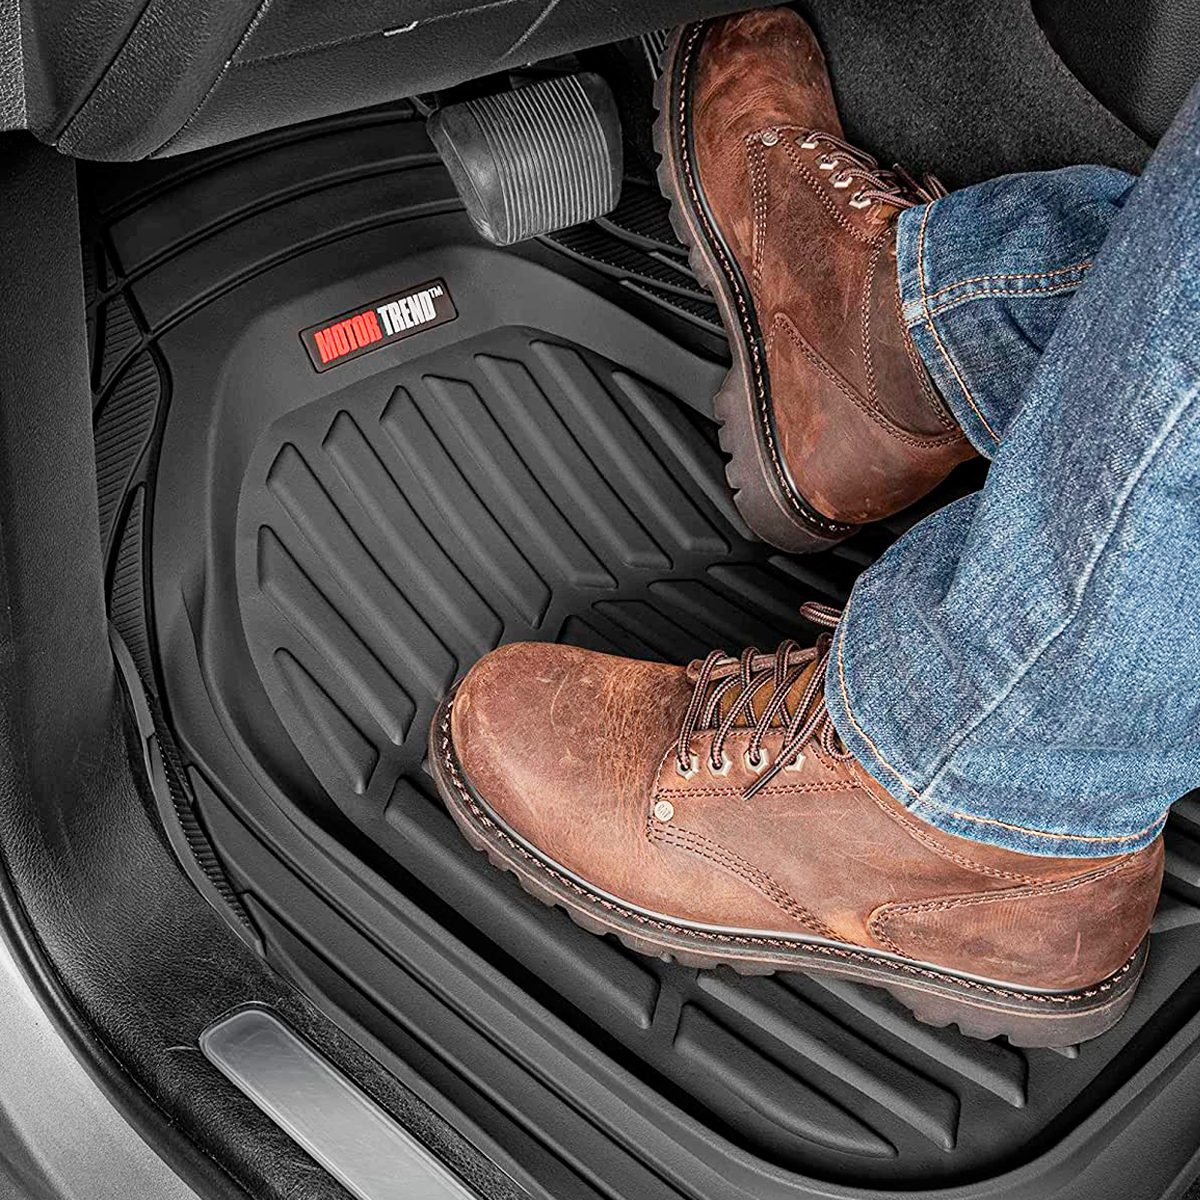 How to Select, Install, and Clean Floor Mats - AutoZone